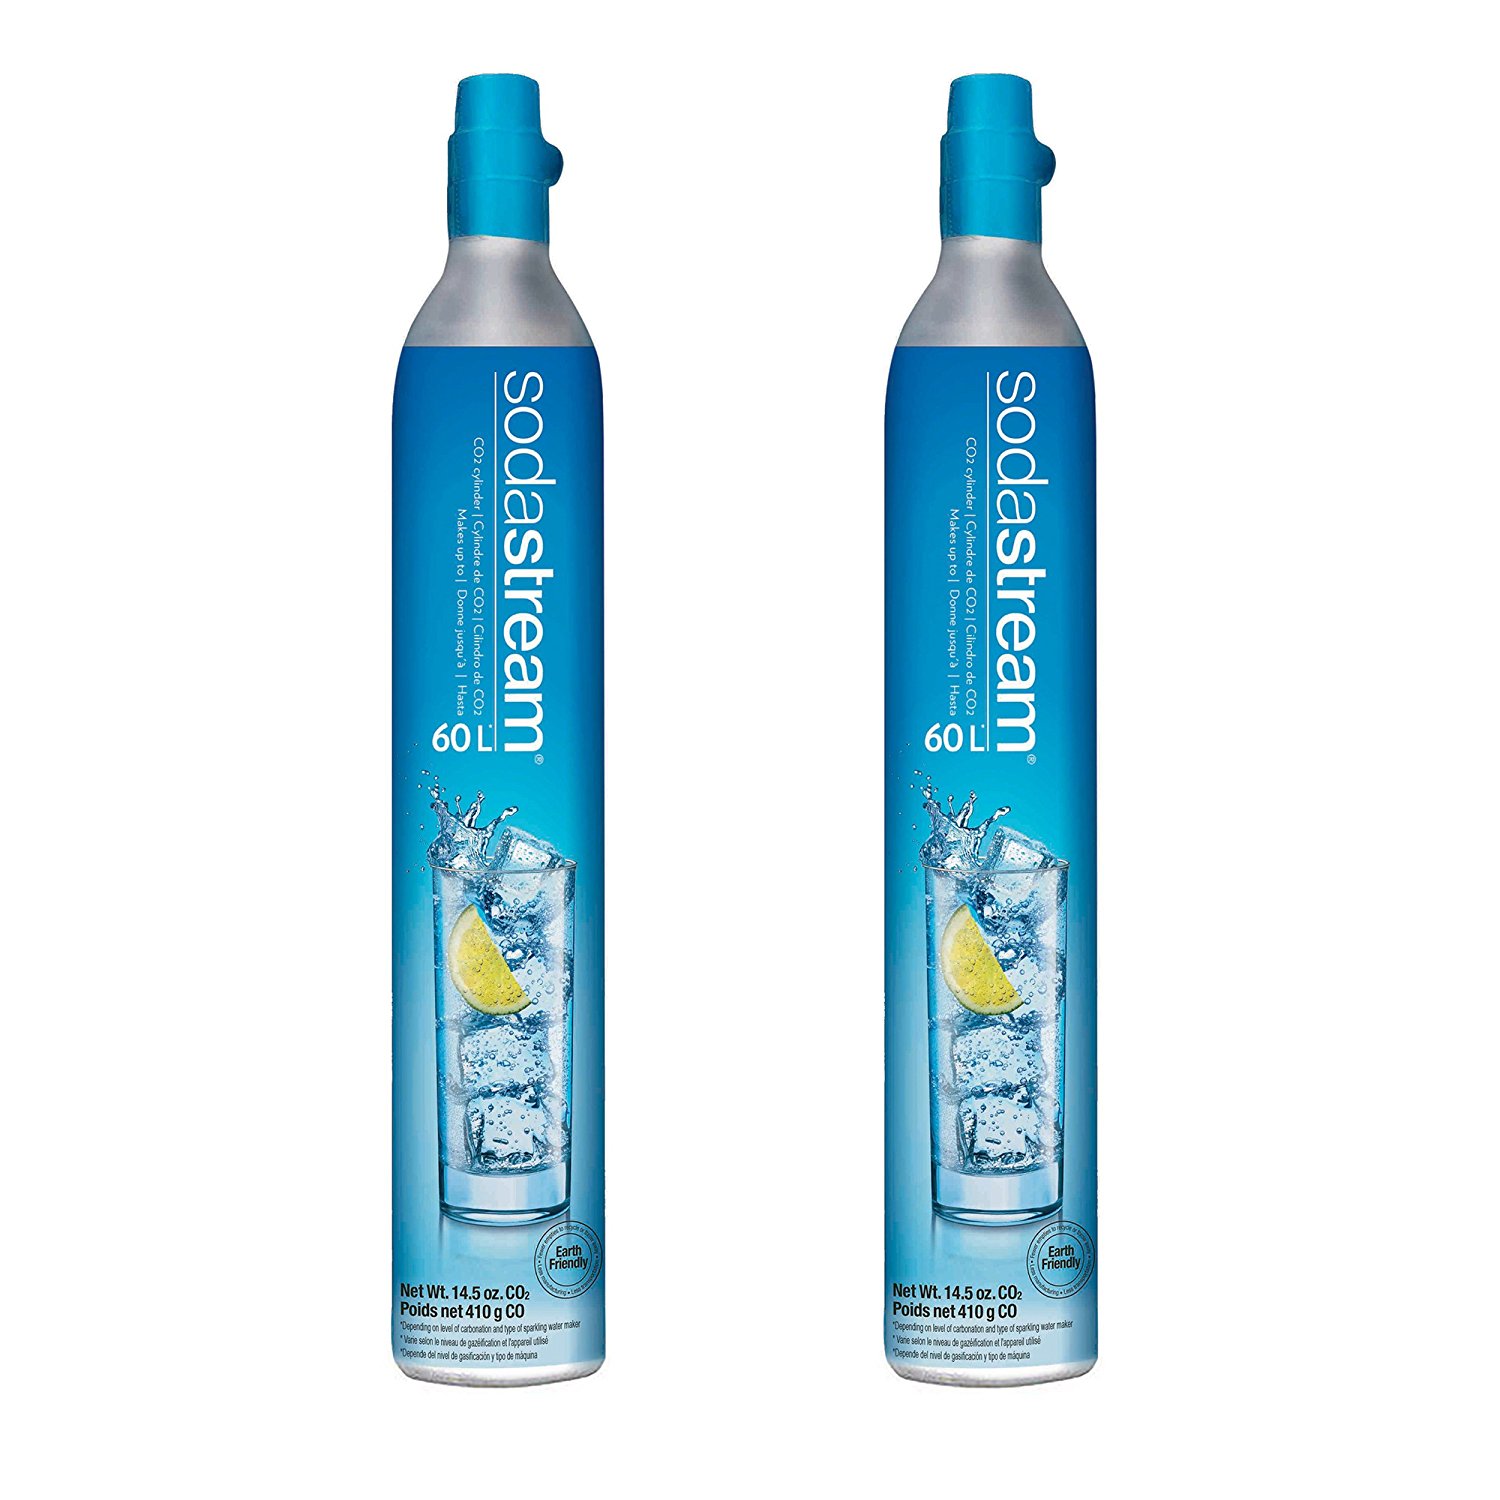 Carbonator 14 5oz For Sodastream 60L Co2 Set Of 2 Makes Up To 120 One 